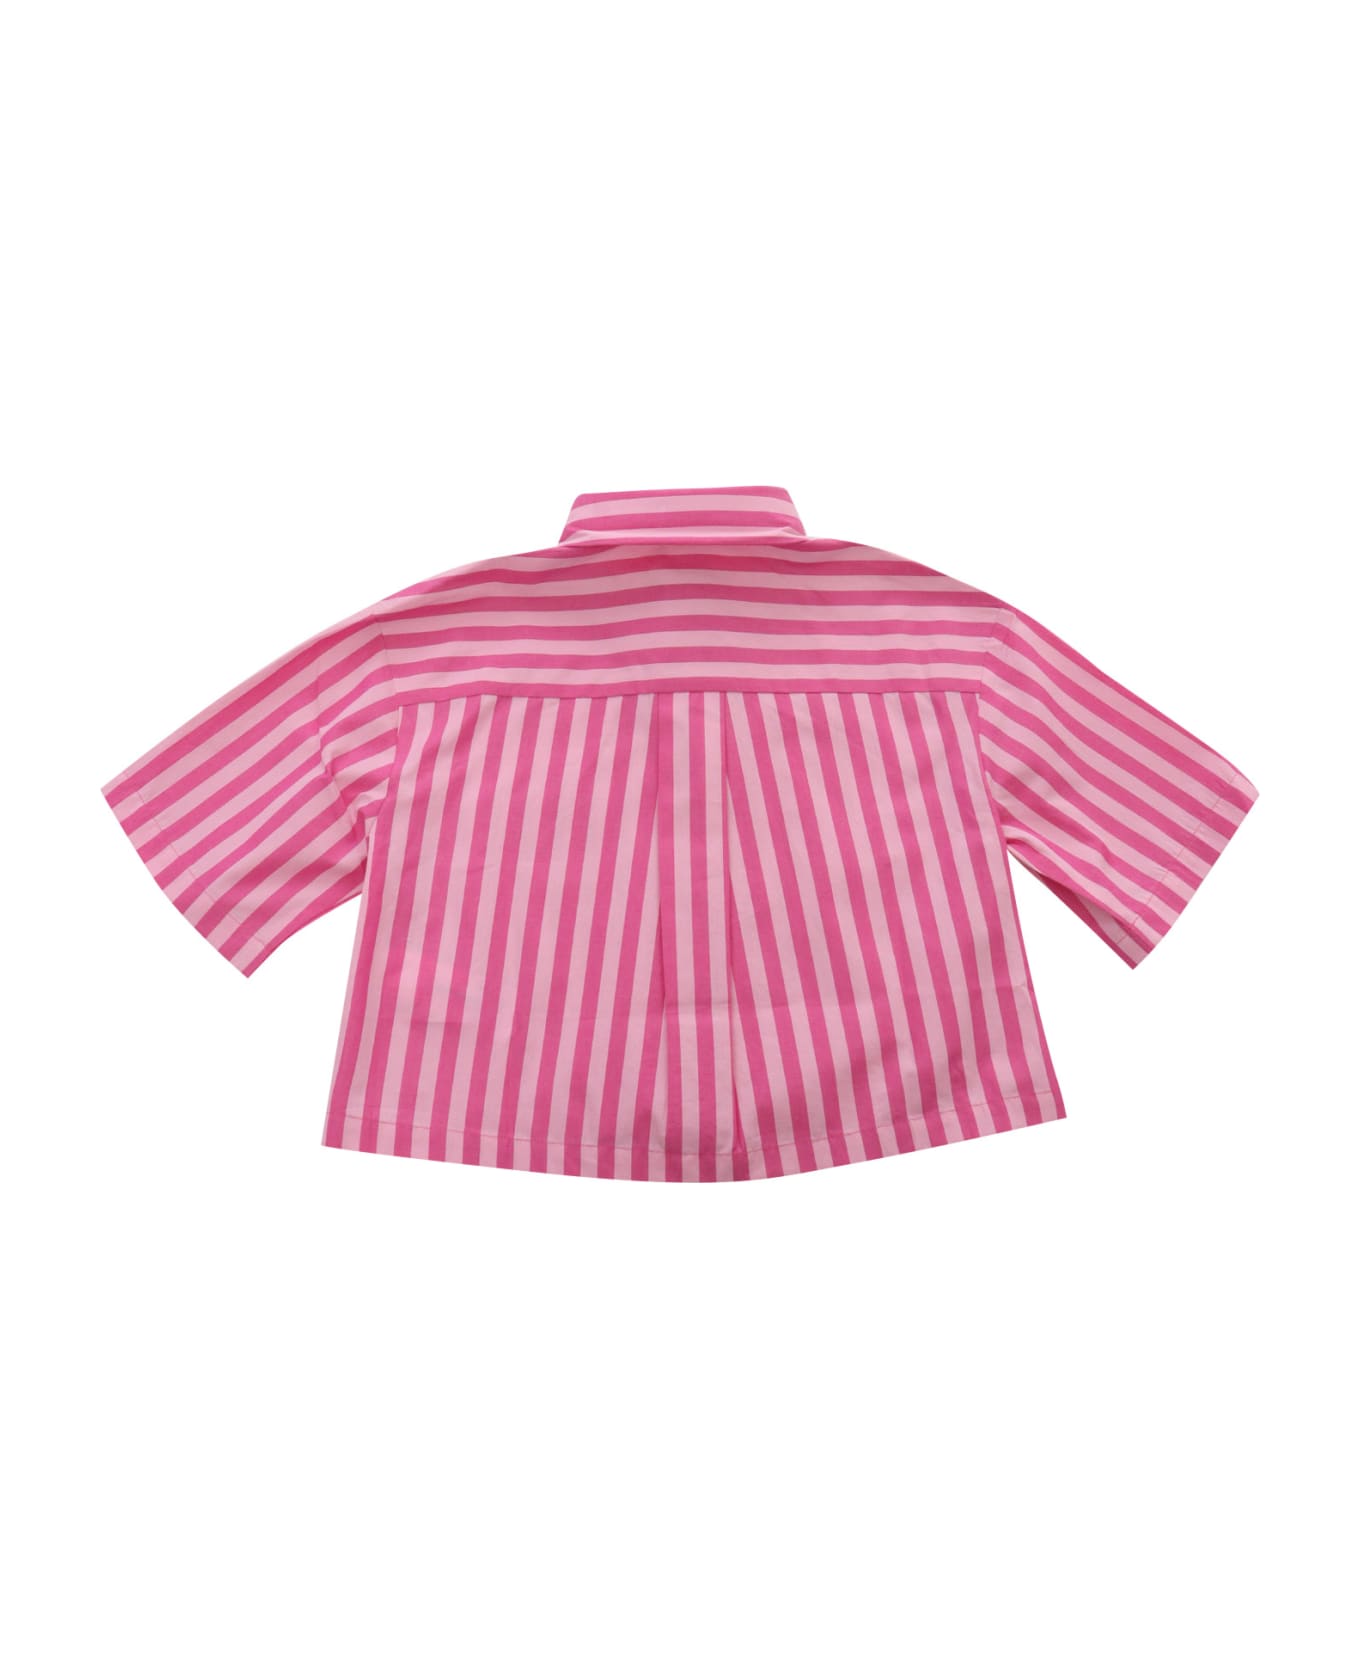 Max&Co. Pink Striped Shirt - PINK